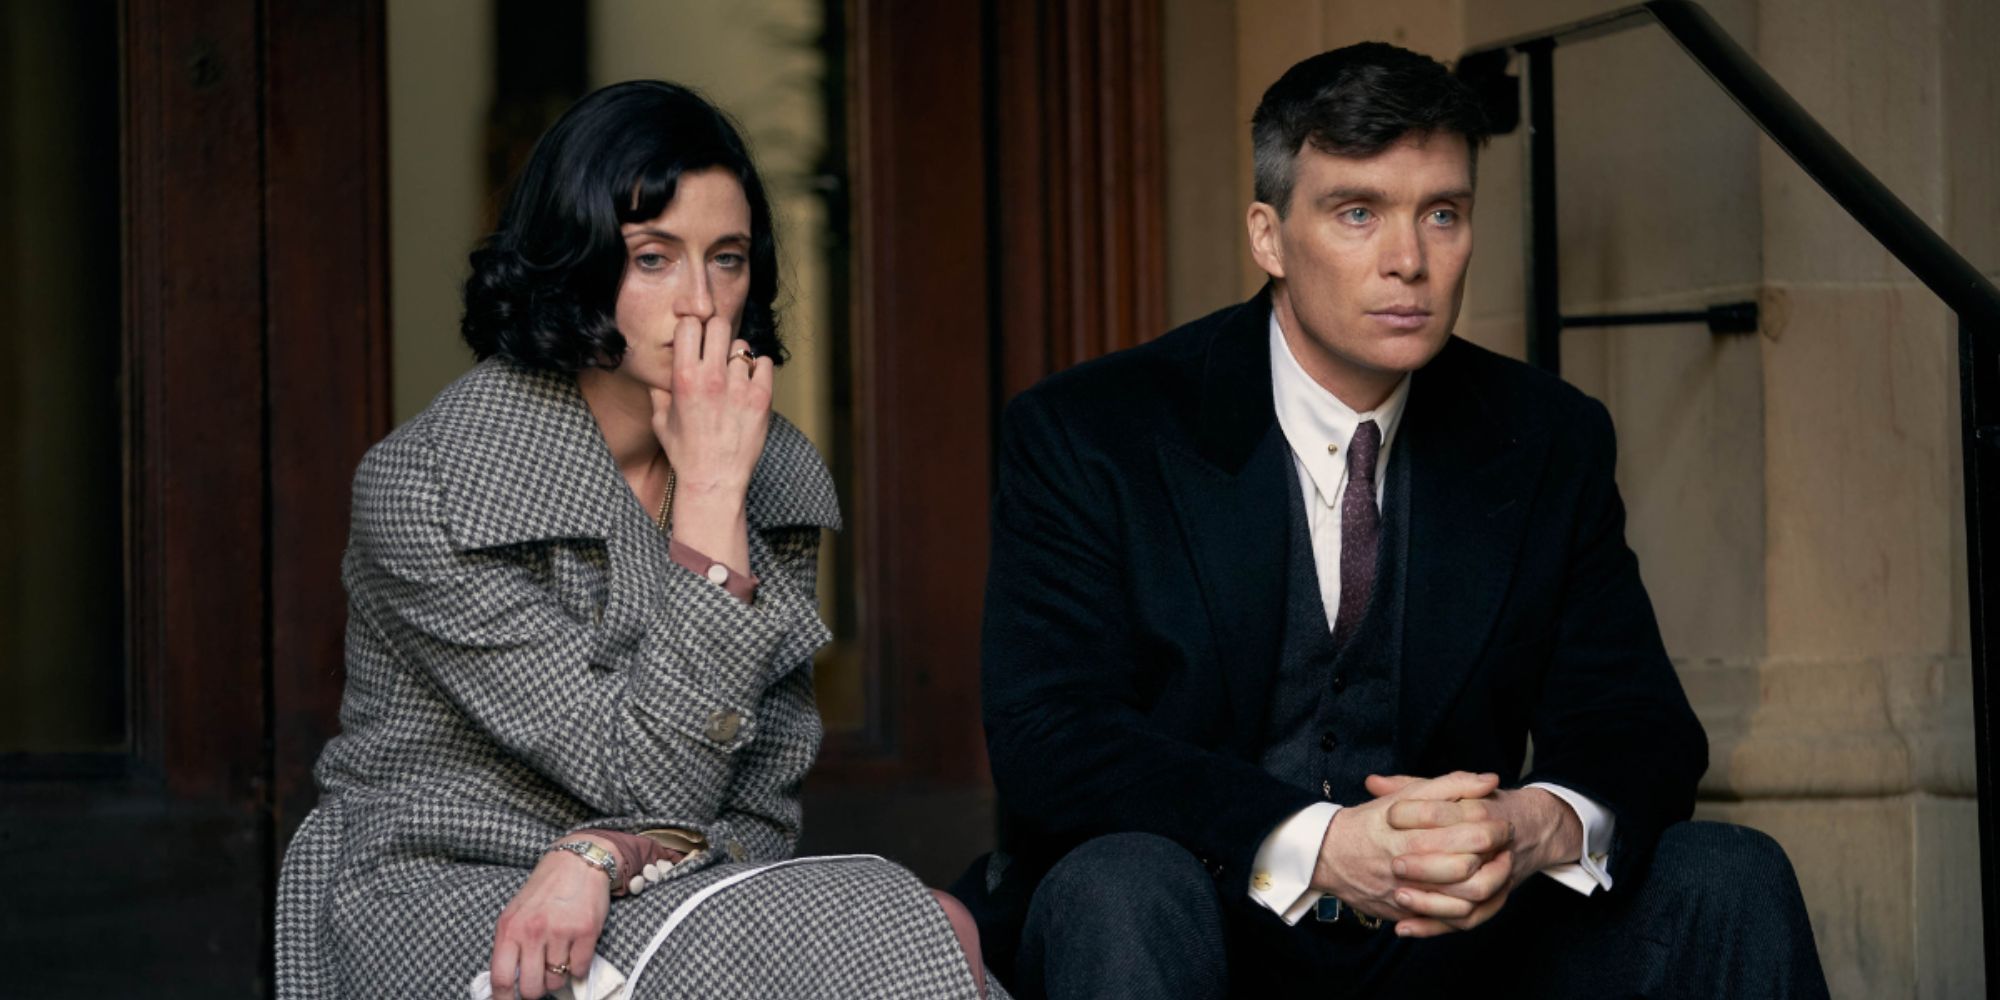 Cillian Murphy as Tommy Shelby and Natasha O'Keeffe as Lizzie Stark in Peaky Blinders Season 6